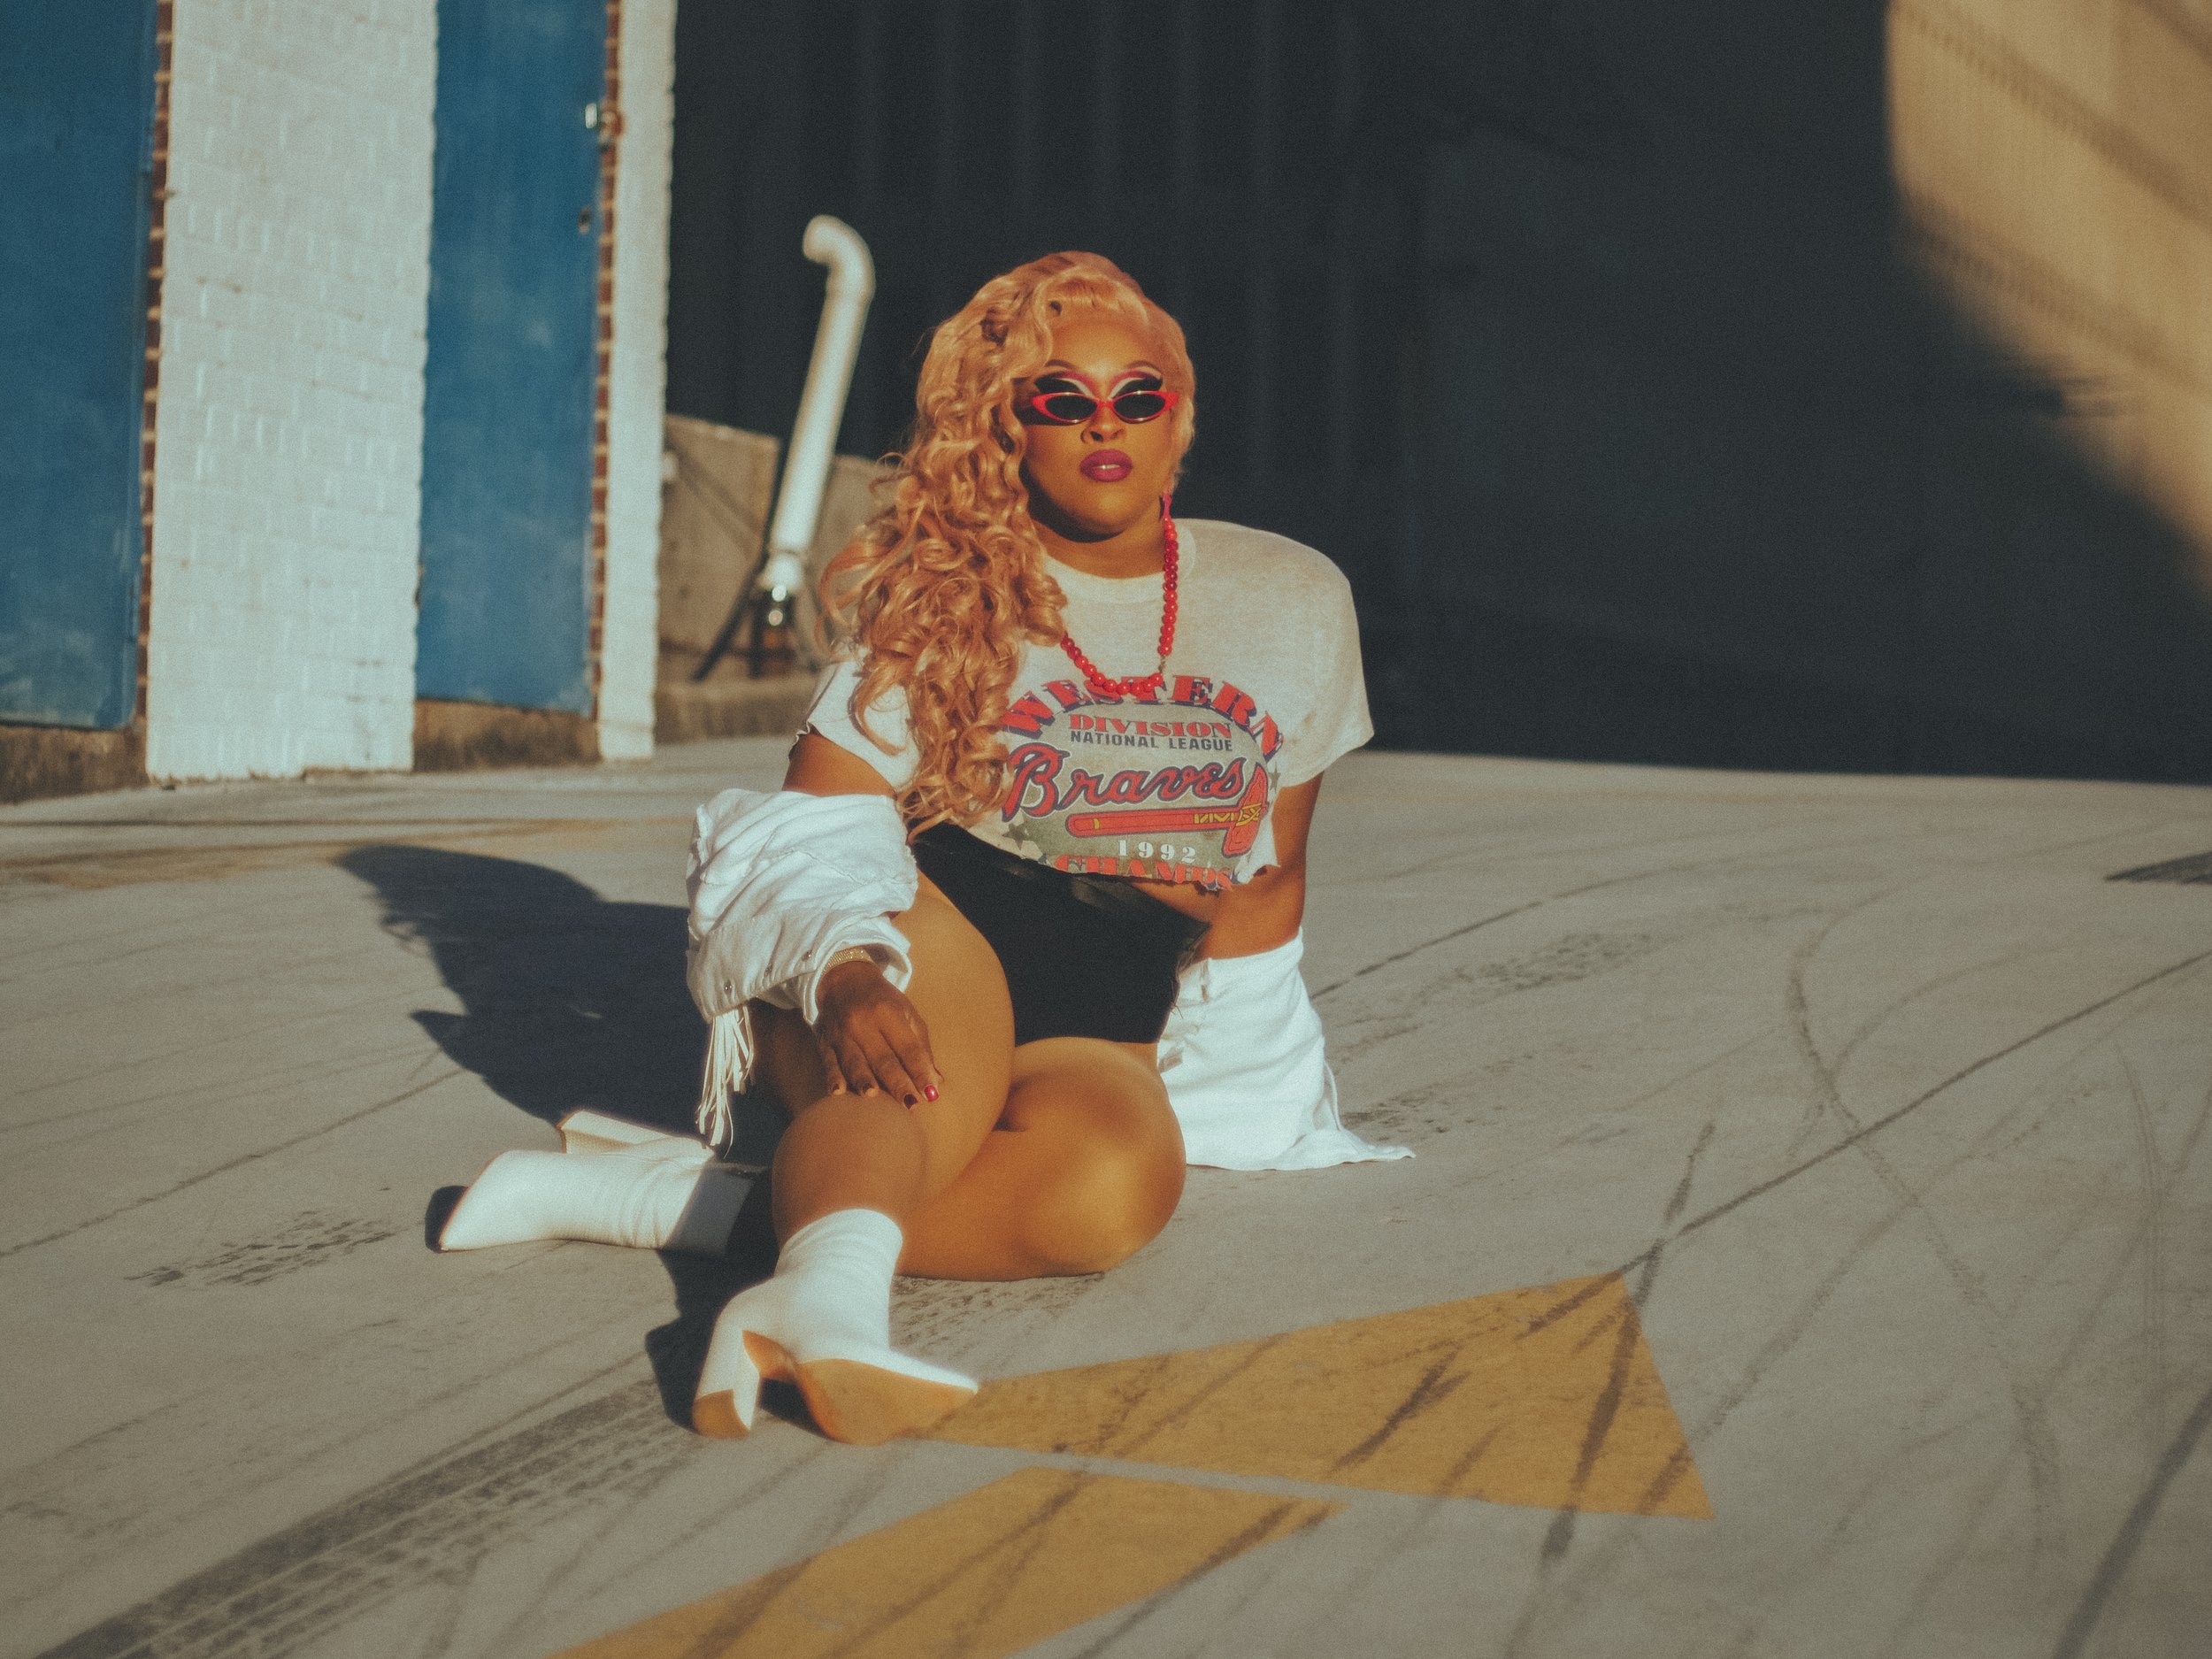 Meet Taylor Alxndr a leading voice in Southern Fried Queer Pride’s LGBTQ+ community